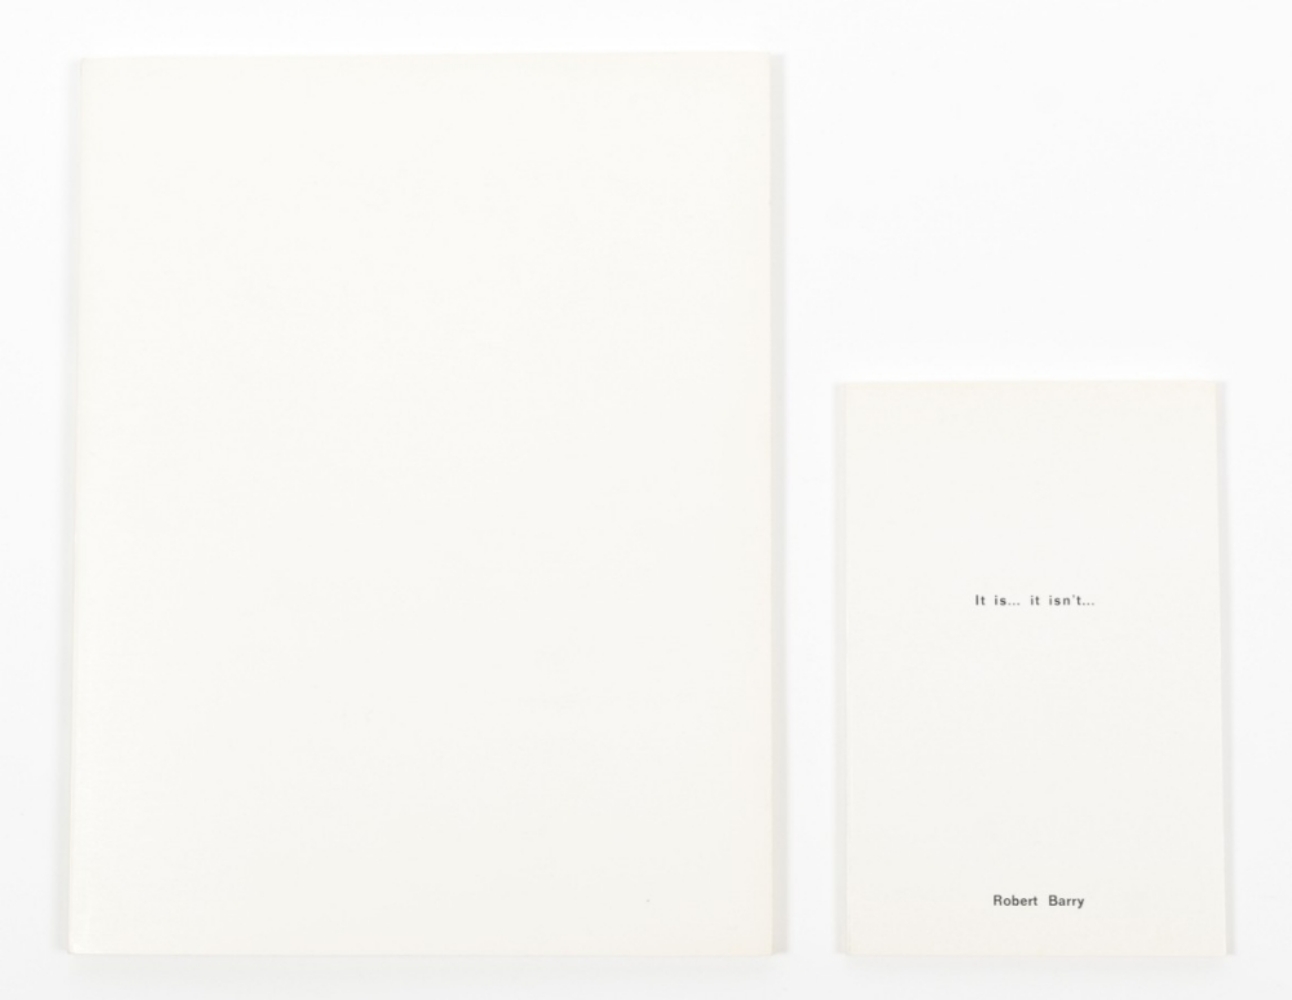 Two artists' publications by Yvon Lambert editions, Paris 1972